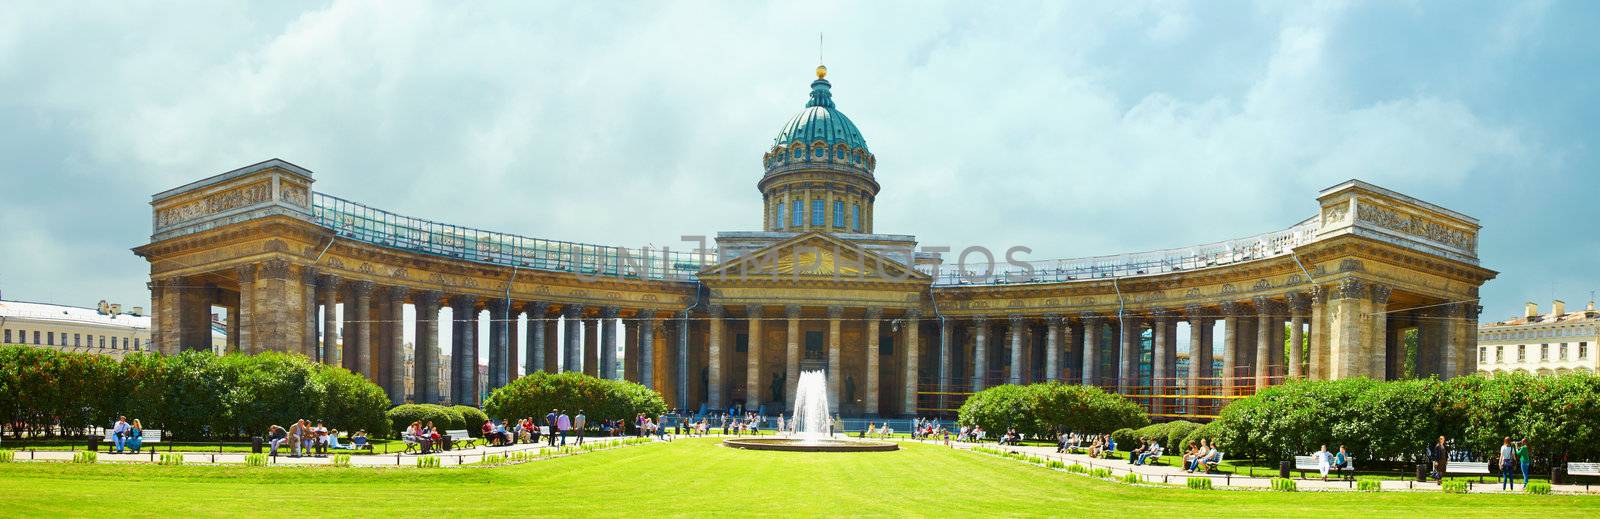 Ancient Kazansky cathedral in the street of St. Petersburg